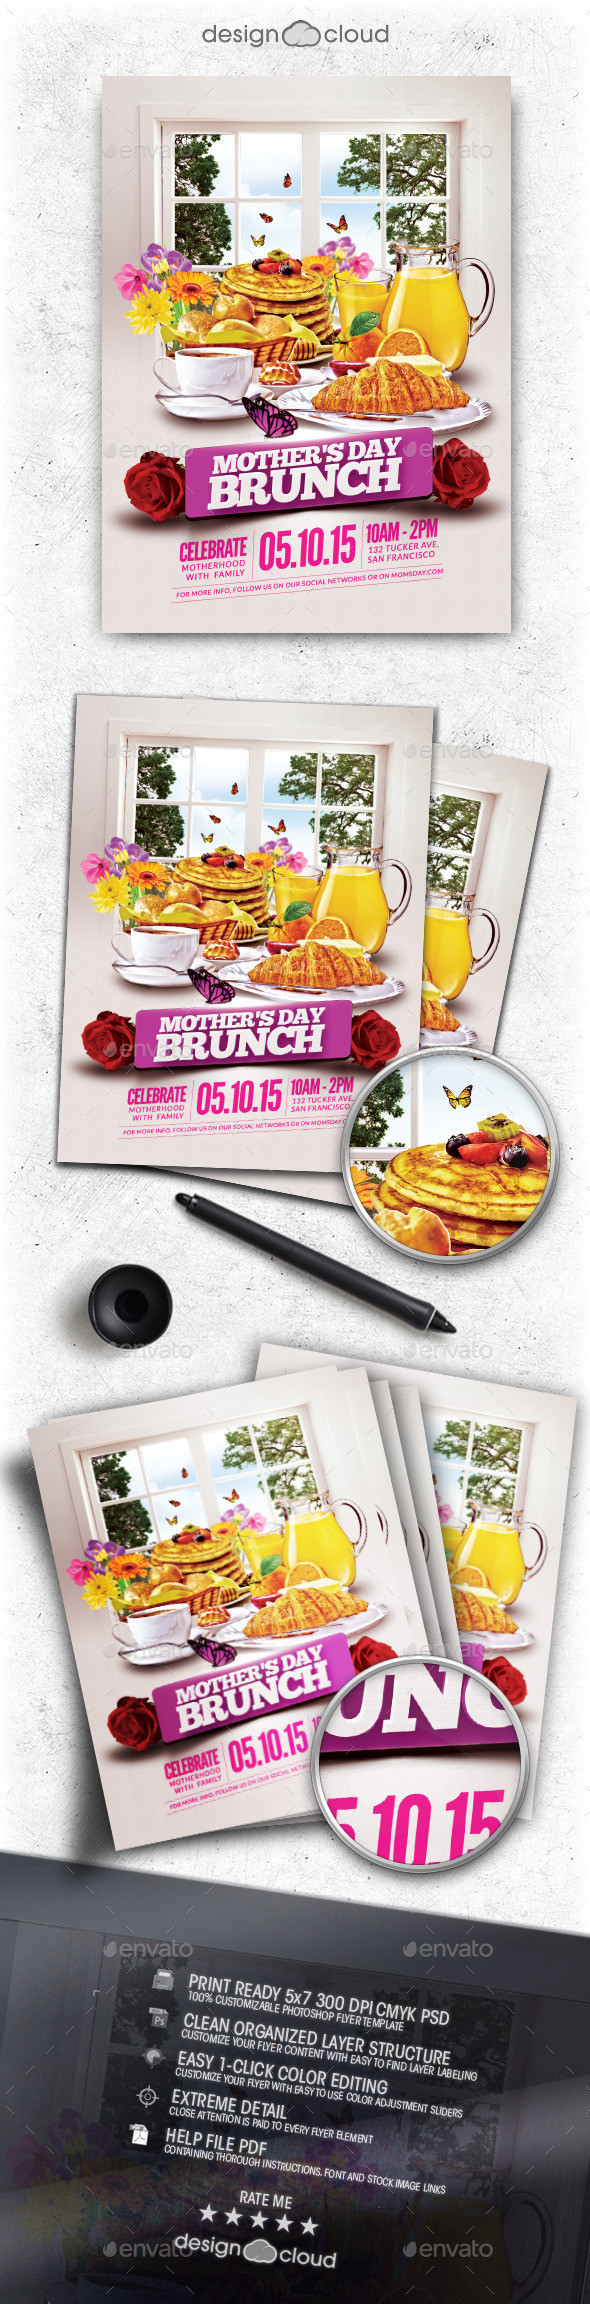 Preview mothers day brunch flyer template